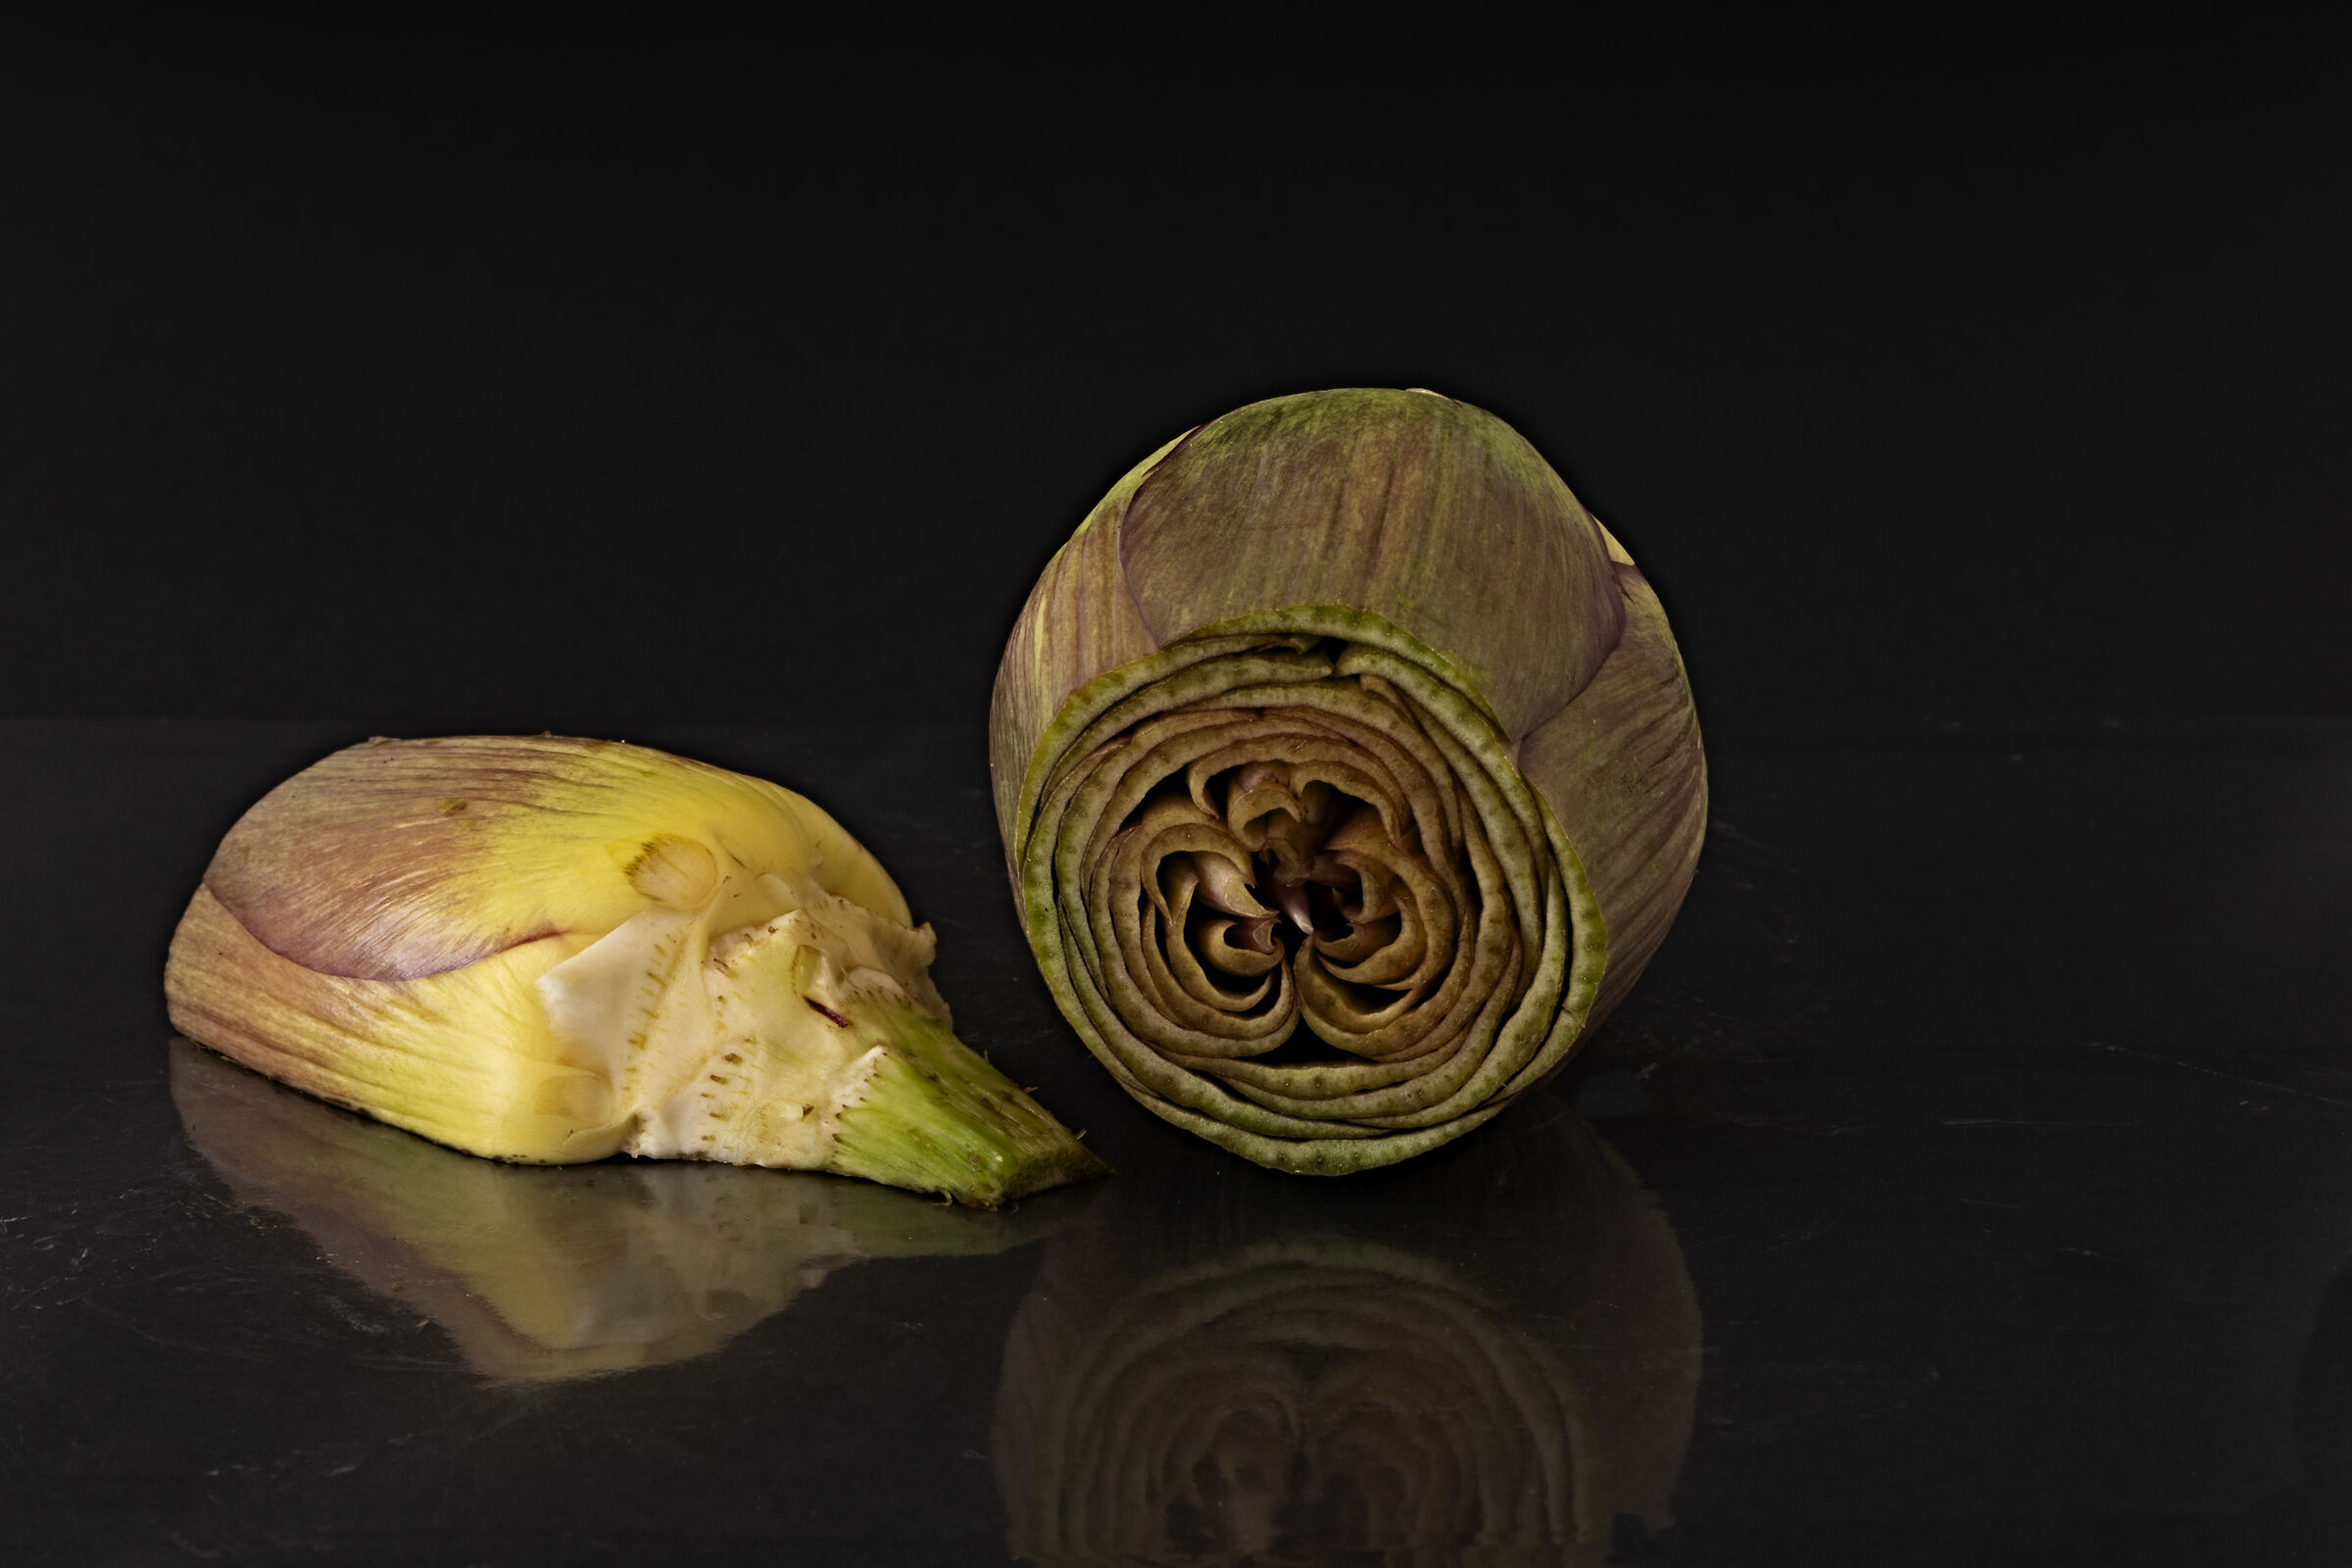 whole artichoke peeled and without thorns...